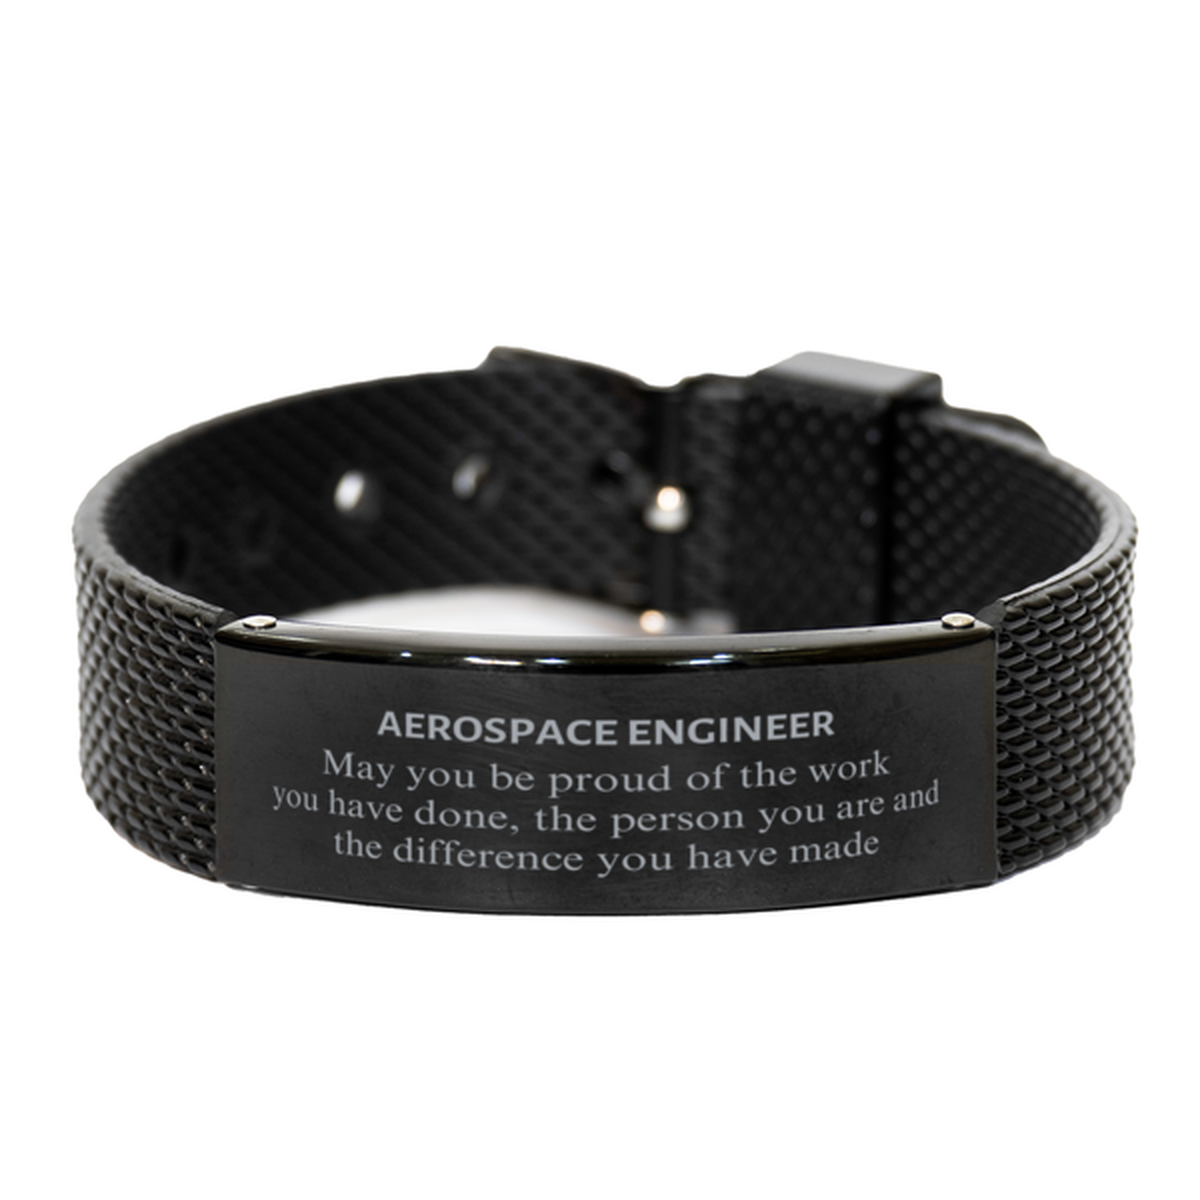 Aerospace Engineer May you be proud of the work you have done, Retirement Aerospace Engineer Black Shark Mesh Bracelet for Colleague Appreciation Gifts Amazing for Aerospace Engineer